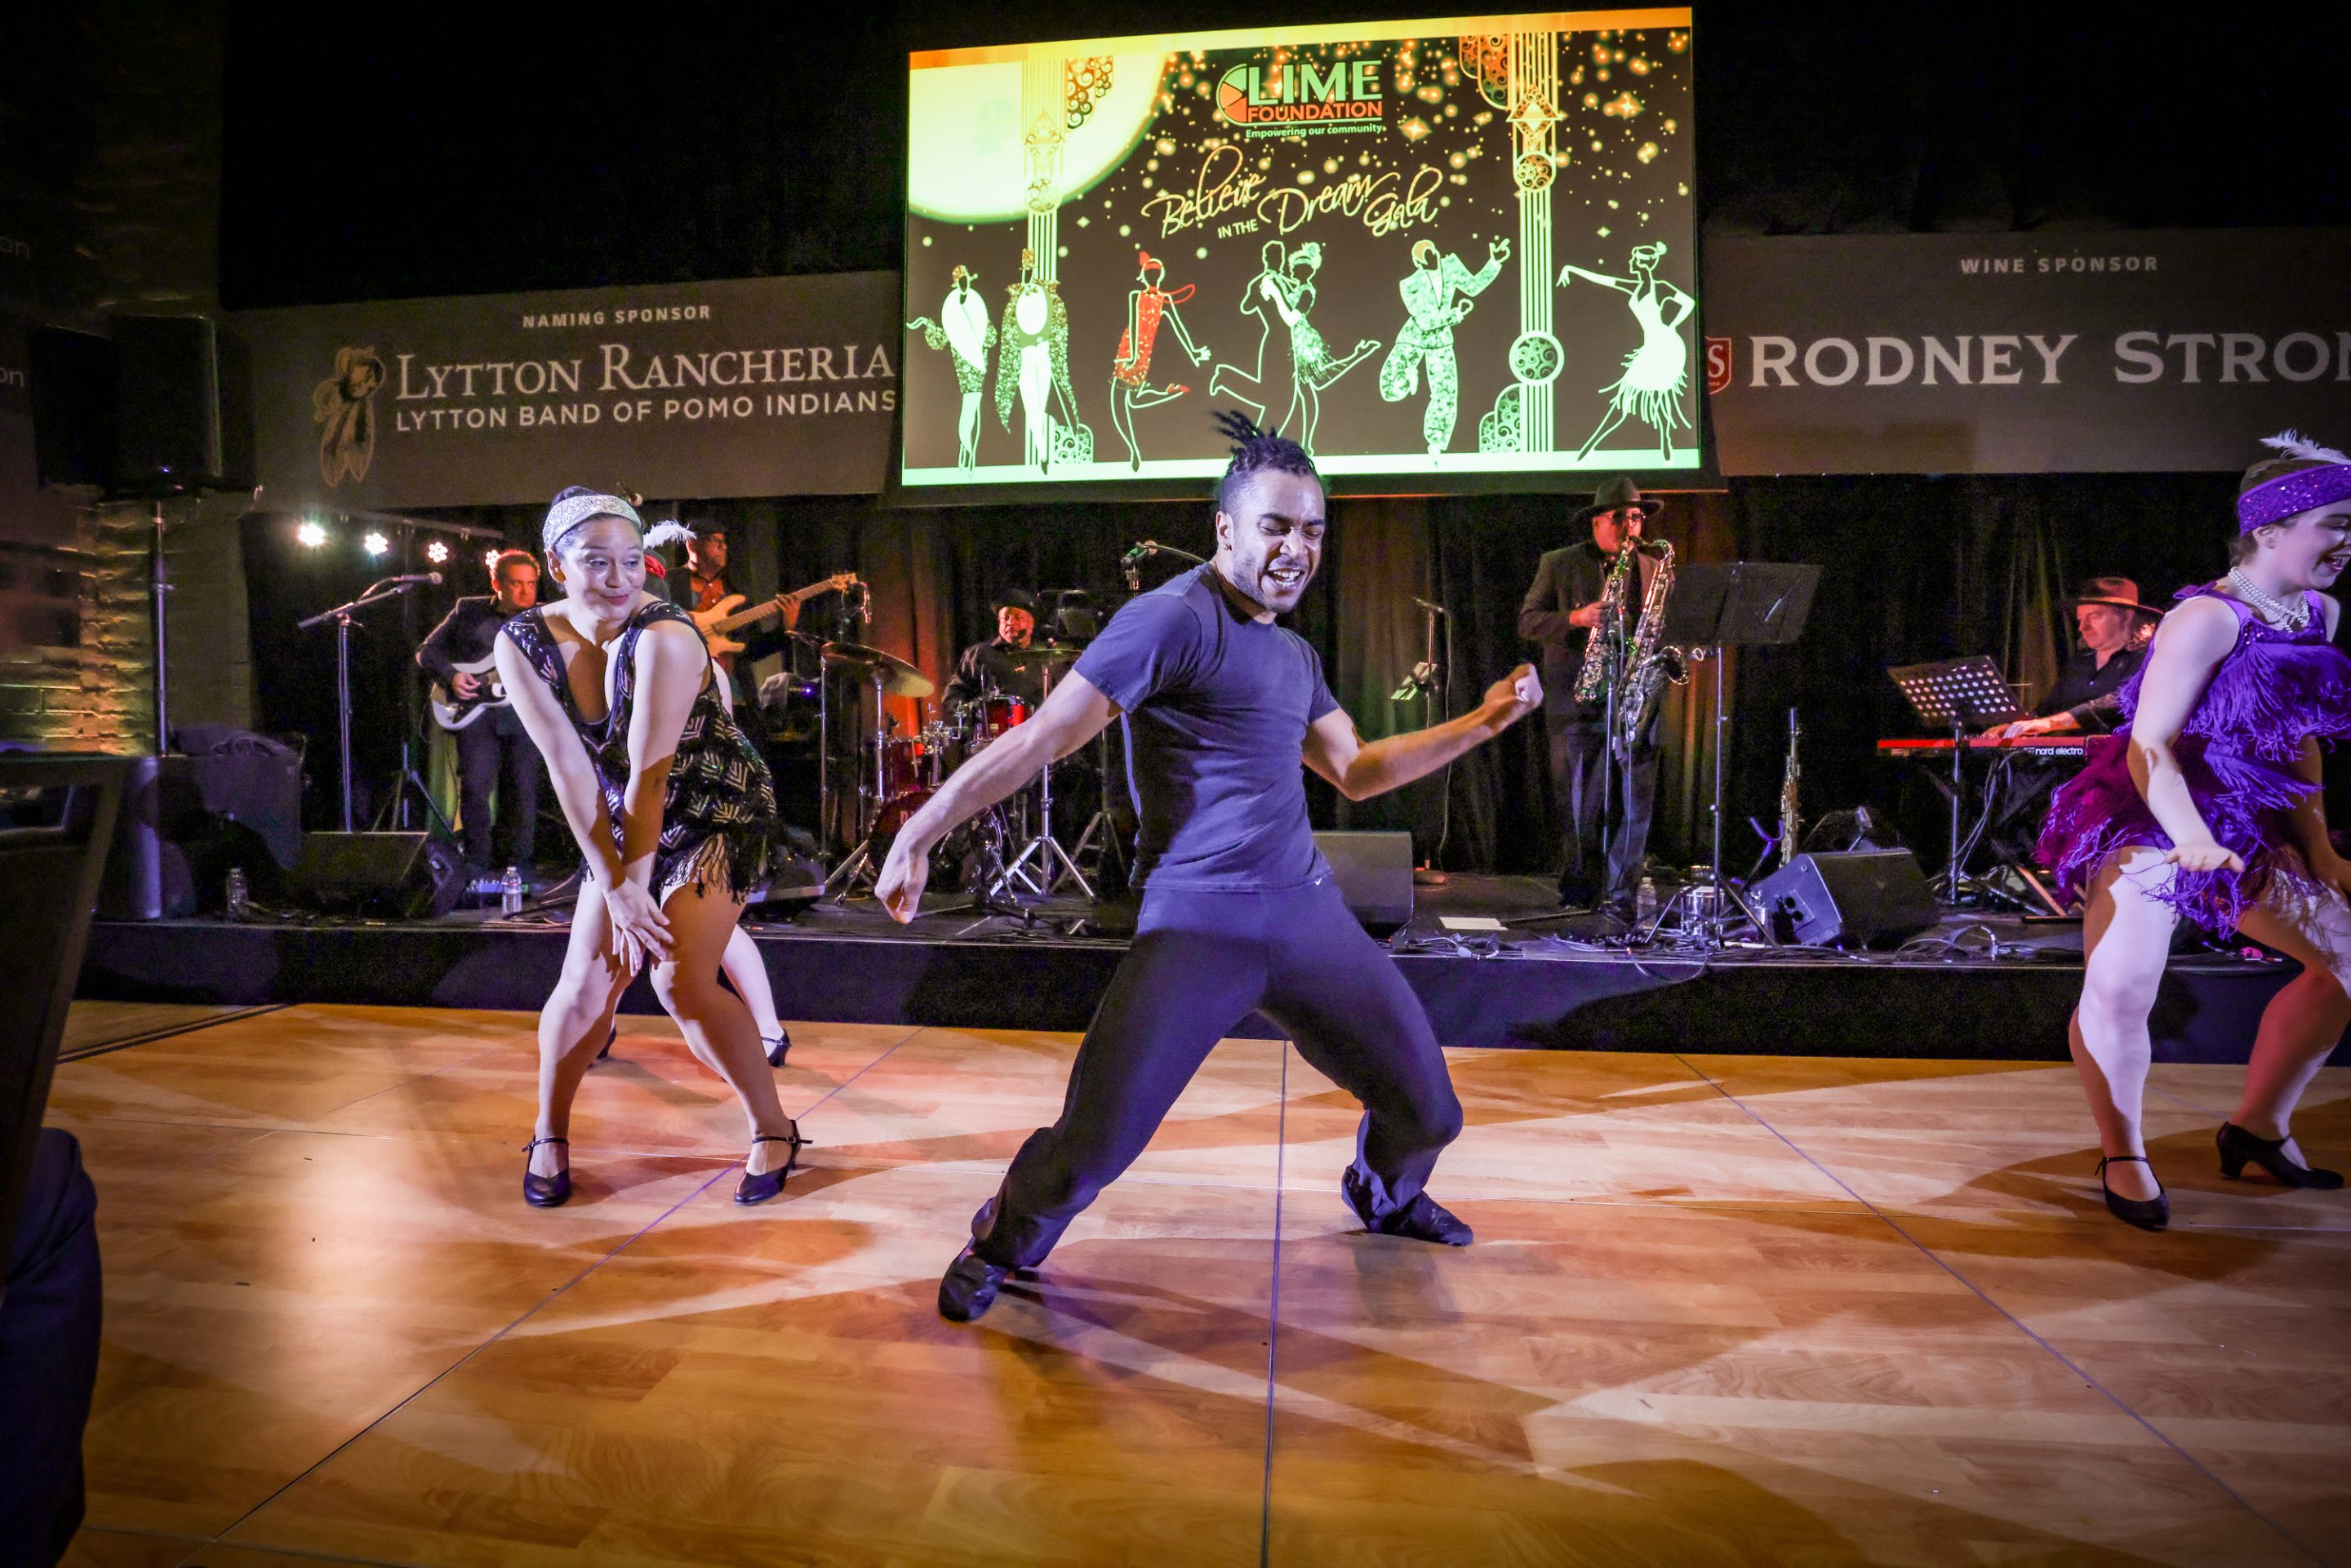 A group of people dancing on stage at The LIME Foundation of Santa Rosa.